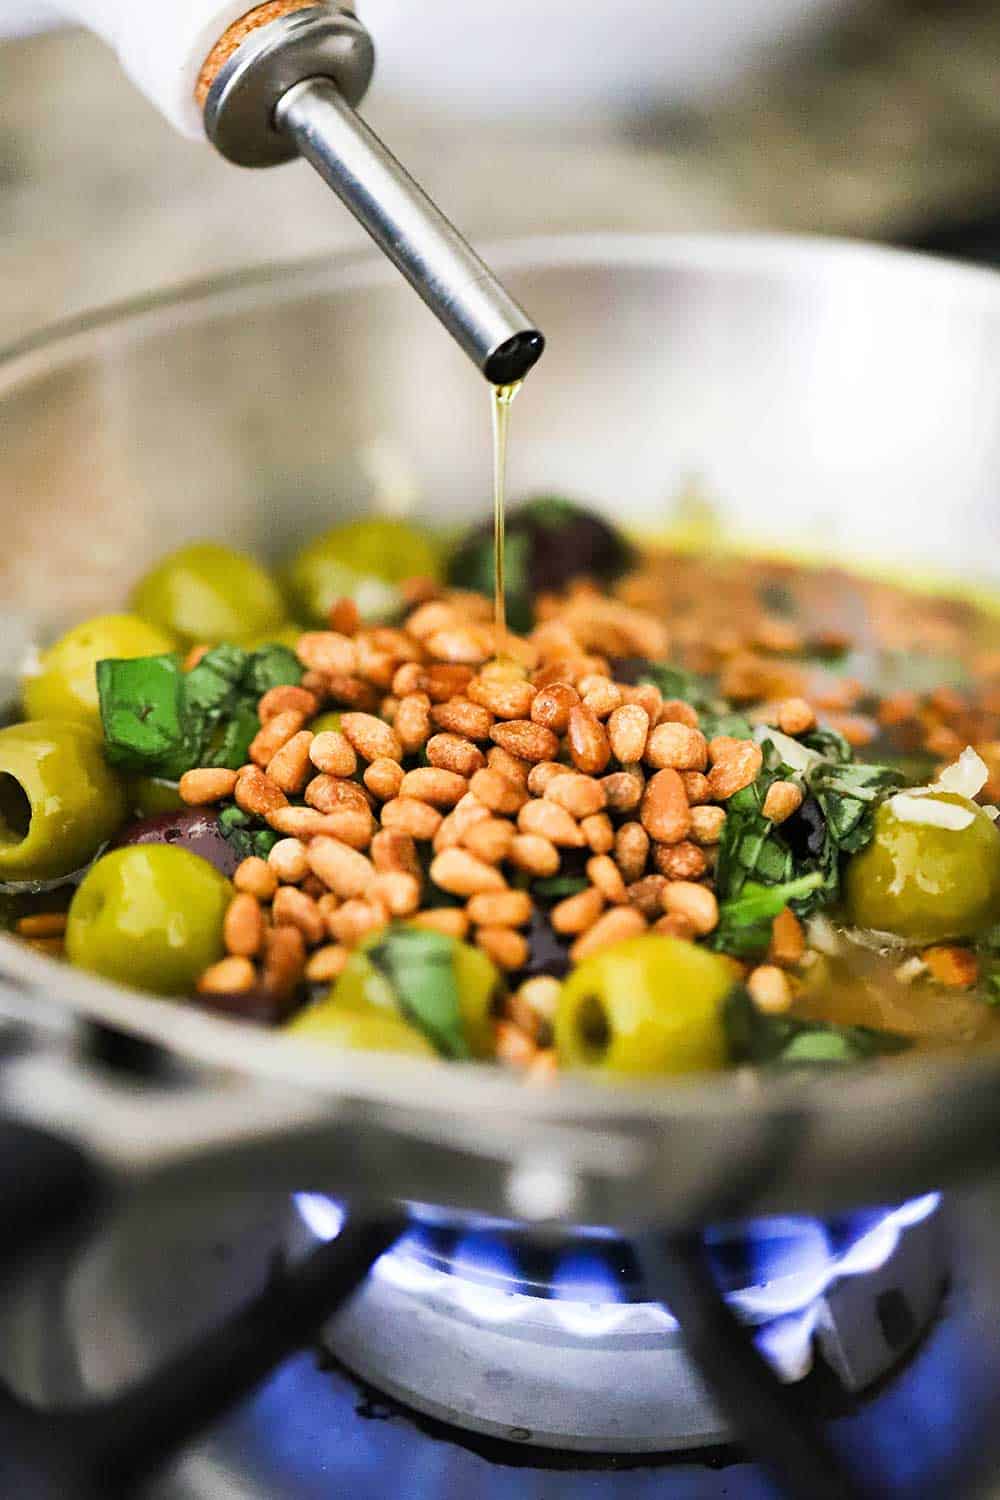 Olive oil being drizzled into a small saucepan filled with toasted pine nuts, olives, garlic, and white wine over a burner on a stove.